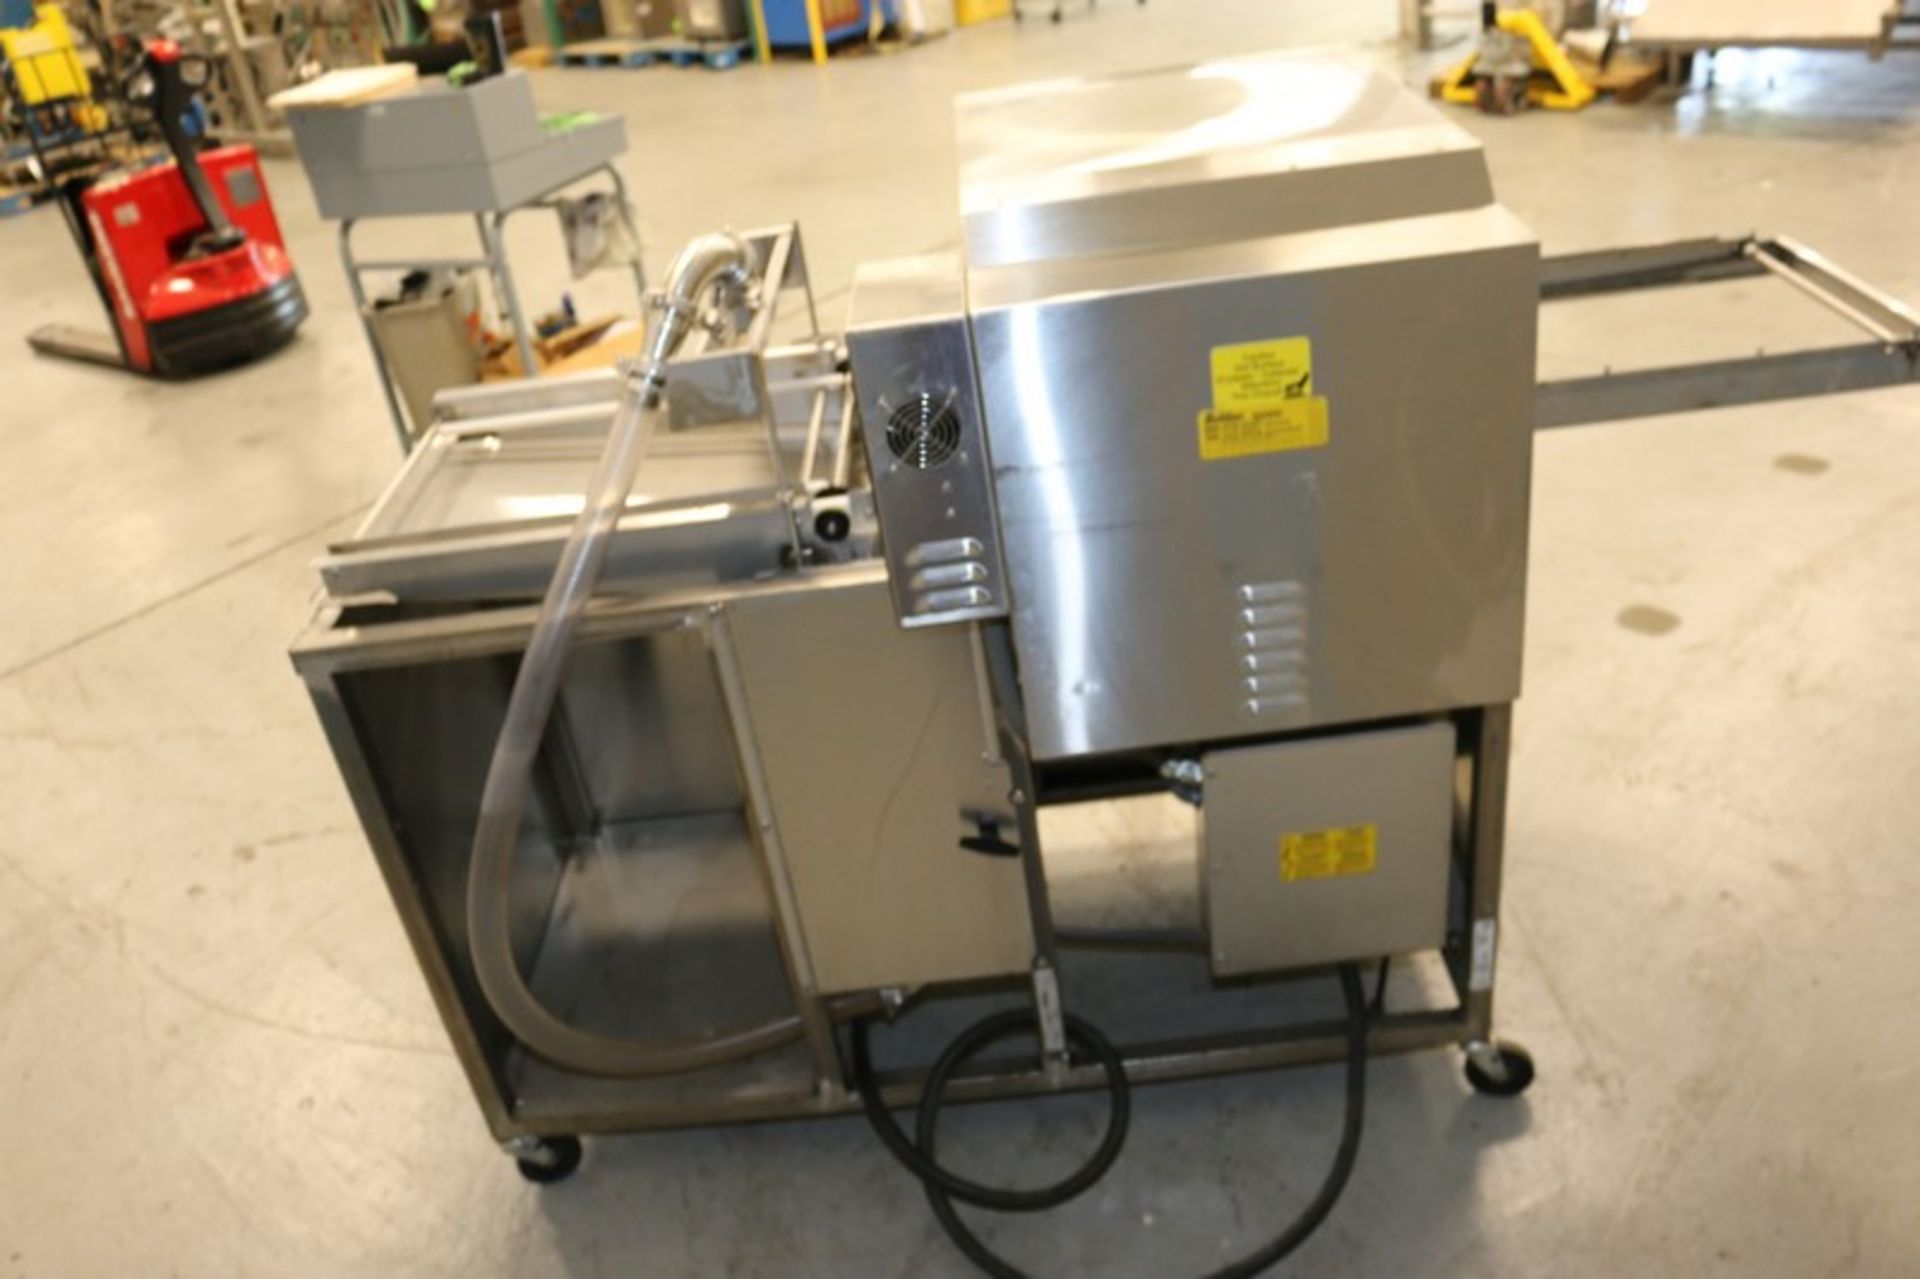 Belshaw S/S Thermoglazer, M/N TG-50, S/N W09050060, 208 Volts, 1 Phase, Product Opening: Aprox. 17- - Image 5 of 10